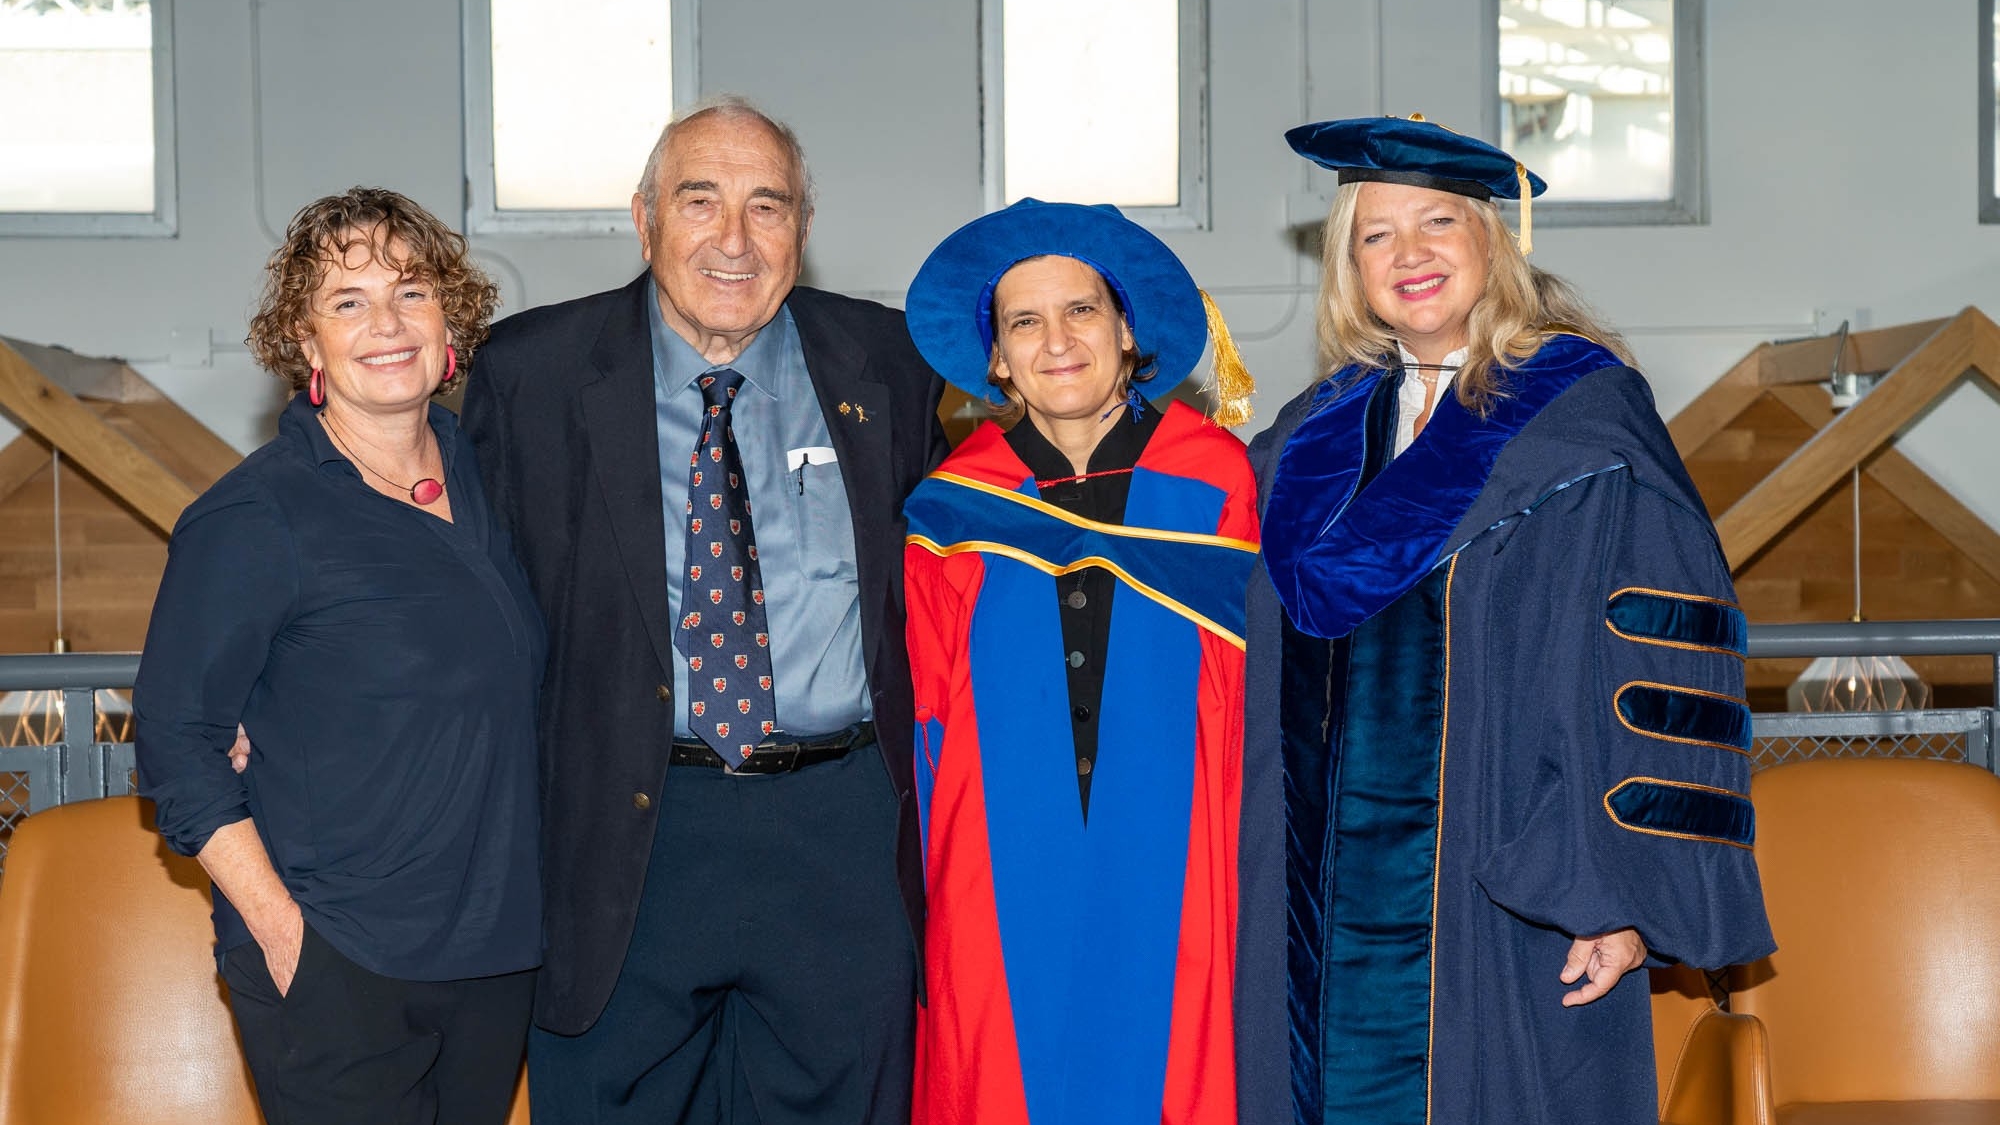 A group photo of Economics Department Chair Anke Kessler, donor Wilson Parasiuk, honorary degree recipient Esther Duflo, and FASS Dean Laurel Weldon